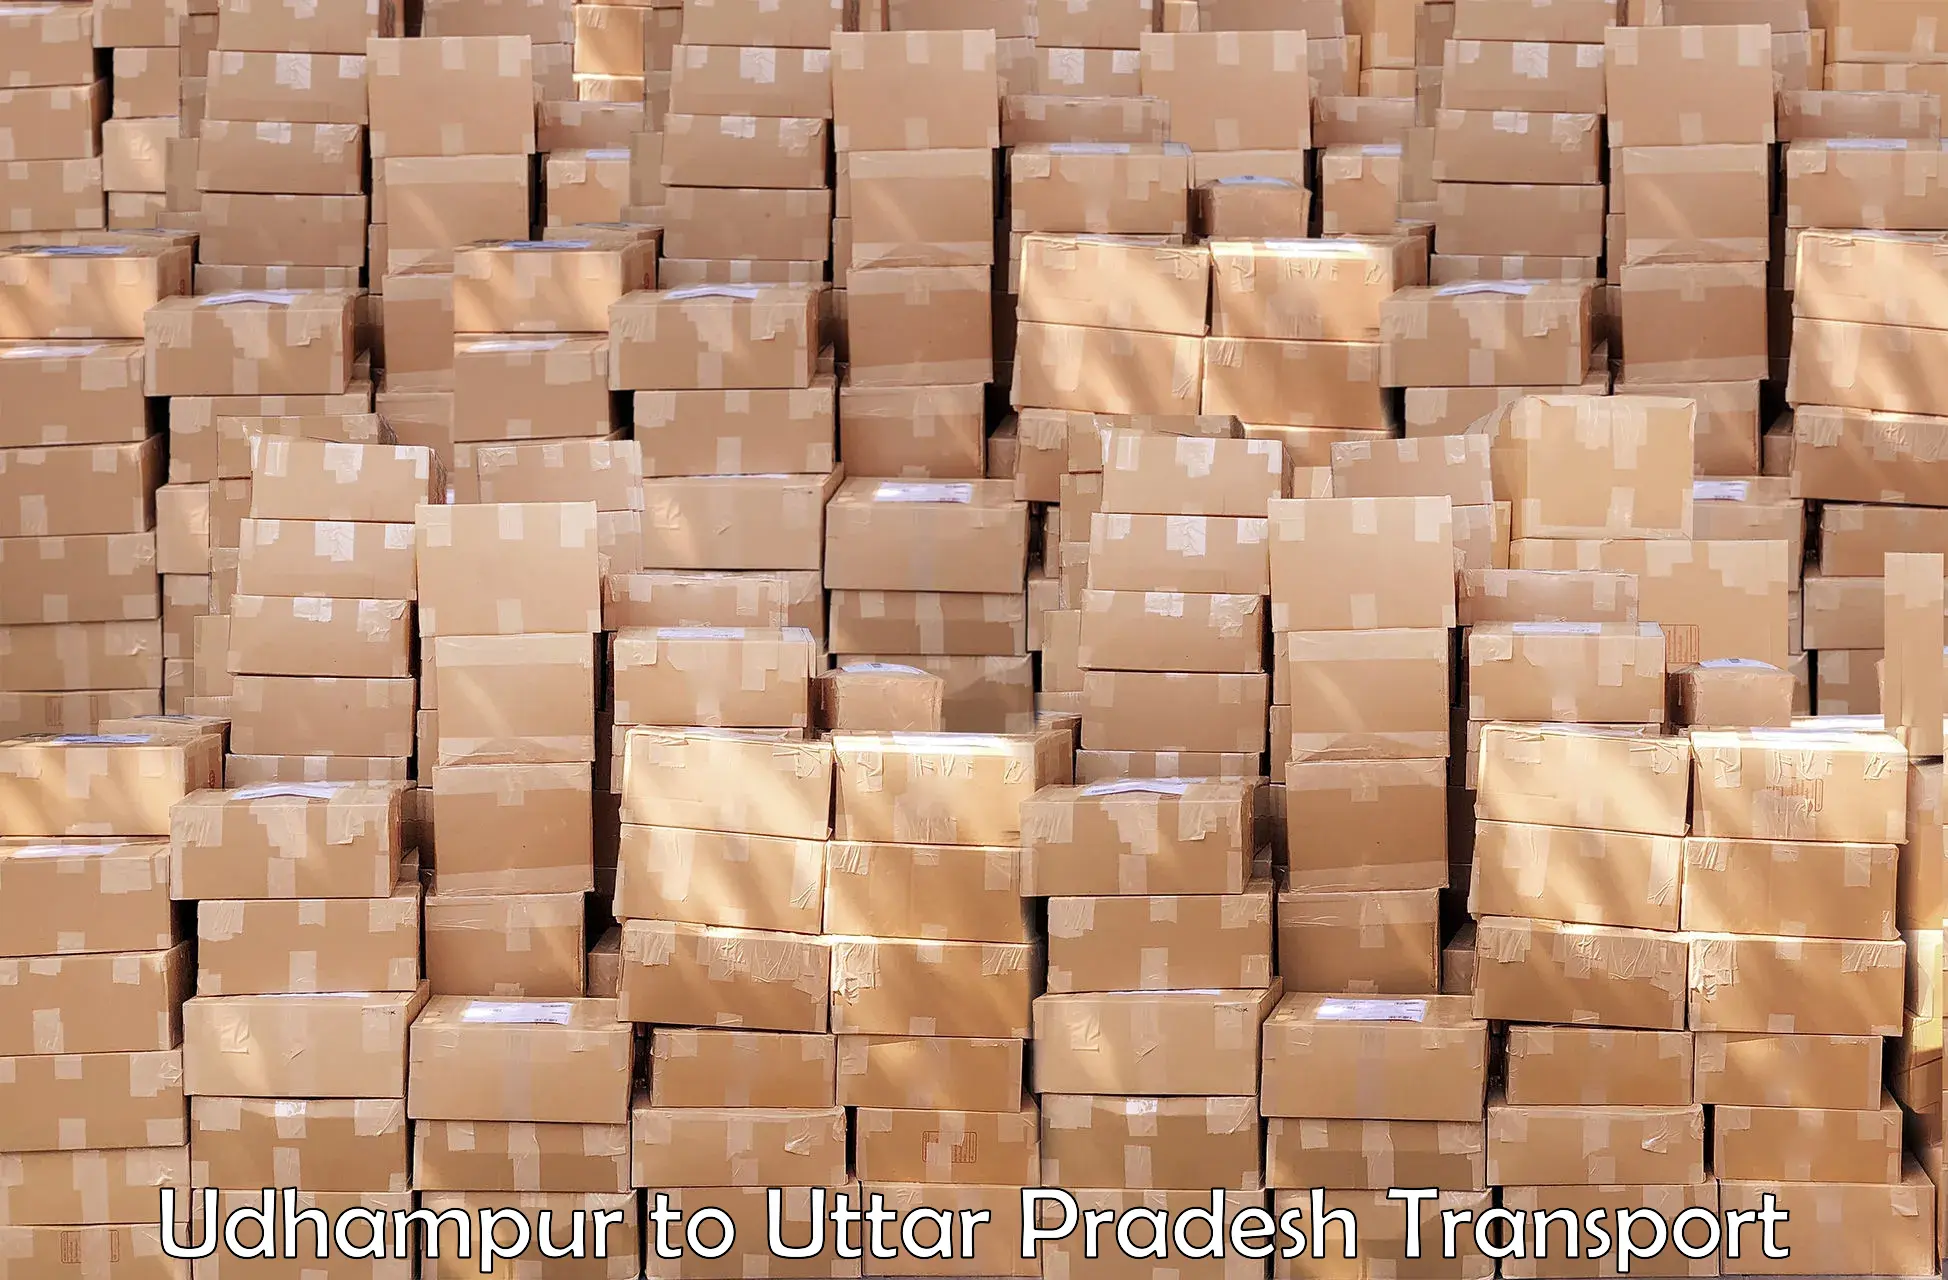 Container transportation services Udhampur to Robertsganj